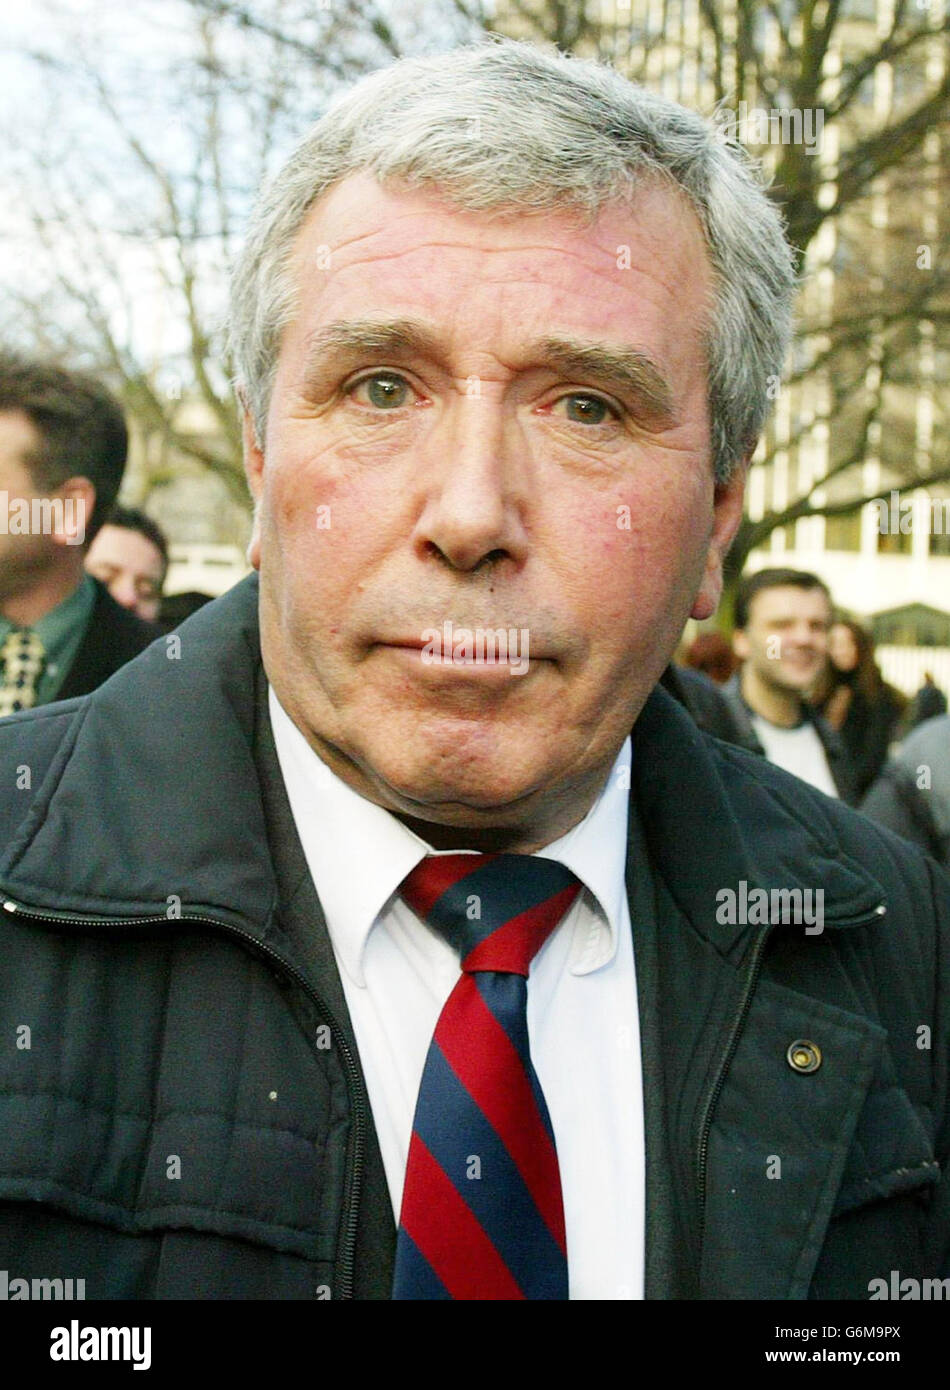 Denis Bell, the Uncle of EastEnders actress Jessie Wallace, , leaves Southend Magistrates Court after his niece was banned from driving for three years and fined 1,000 after failing a breath test in March. Bell had claimed in court that he had spiked two glasses of white wine - which Wallace admitted to drinking - with vodka as a joke. Stock Photo